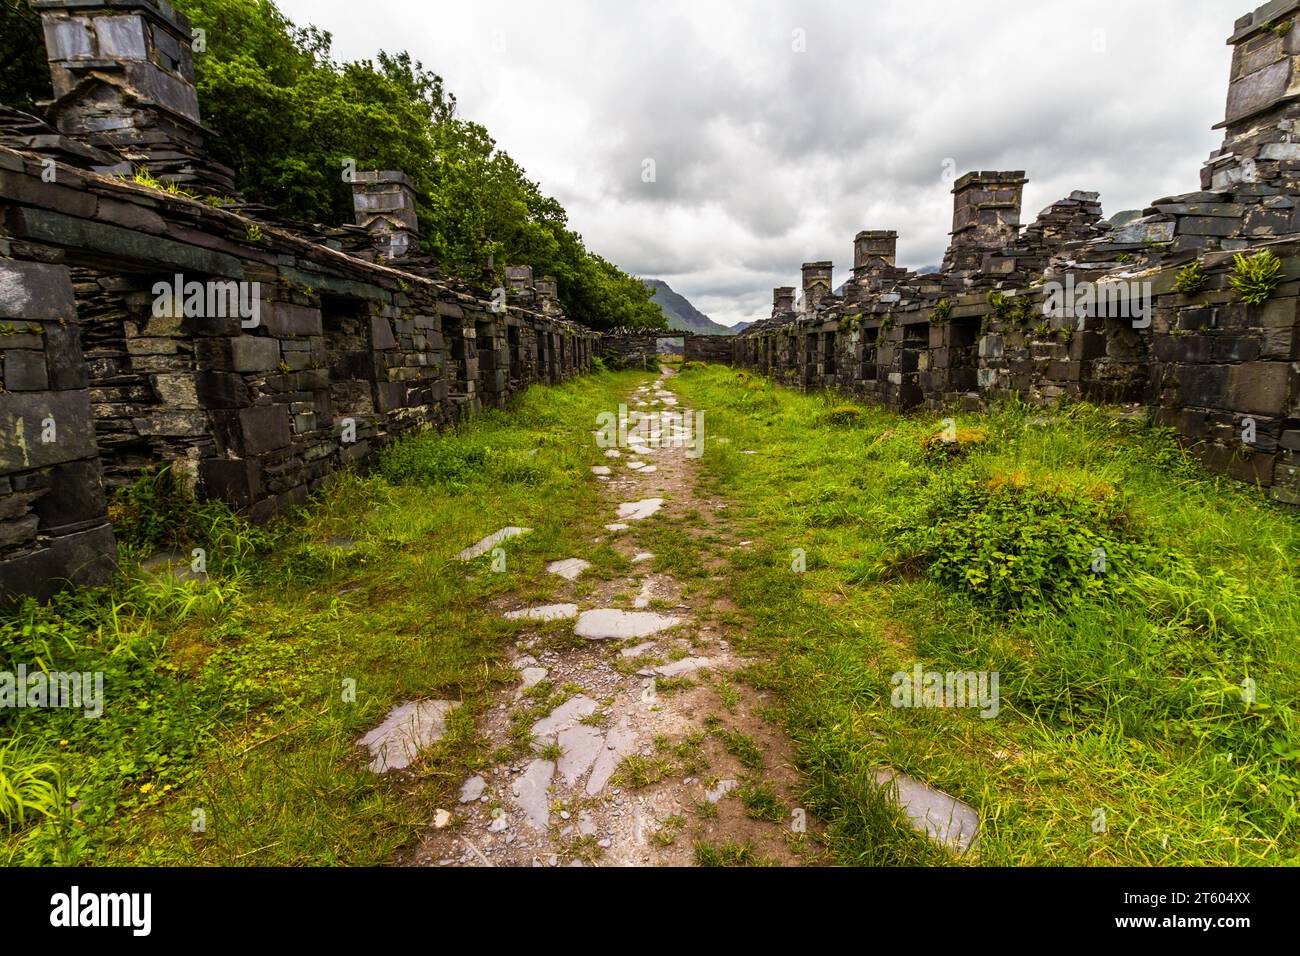 Entrance to Anglesey Barracks, derelict accommodation at Dinorwic slate quarry in Snowdonia or Eryri National Park, North Wales, UK, landscape, wide a Stock Photo